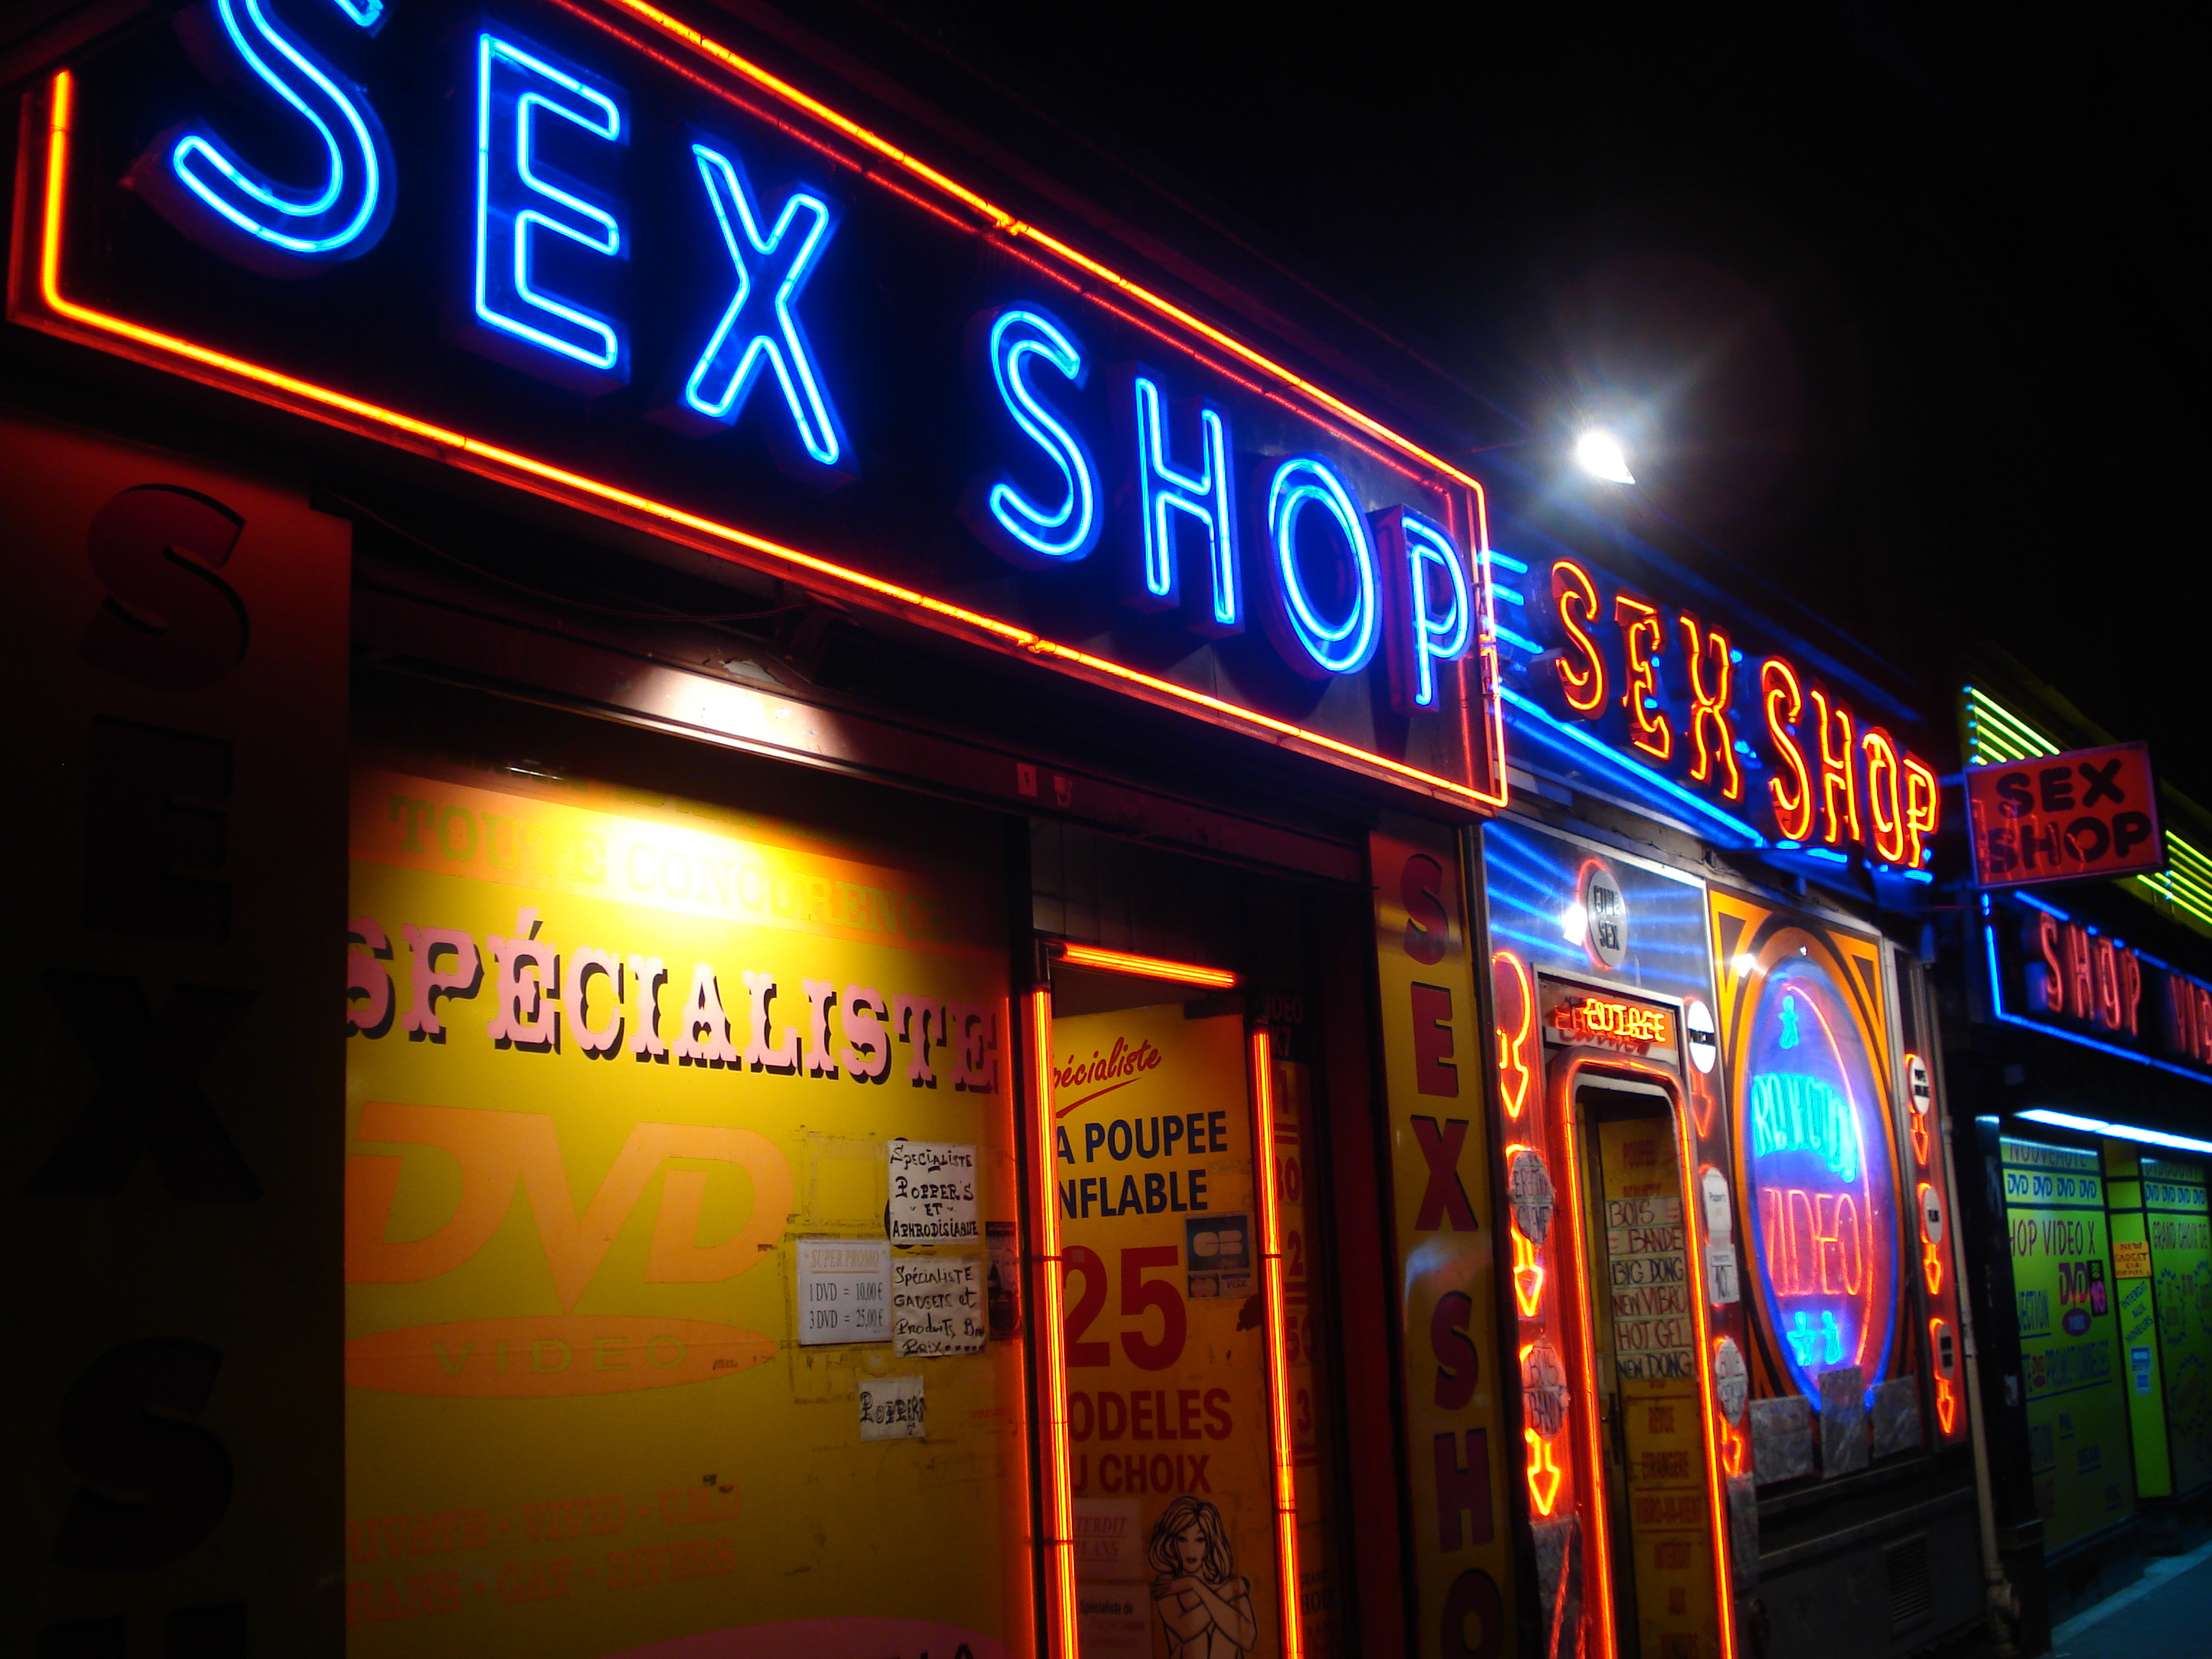 Sex Store France 18 Shops Paris Adult Toy In